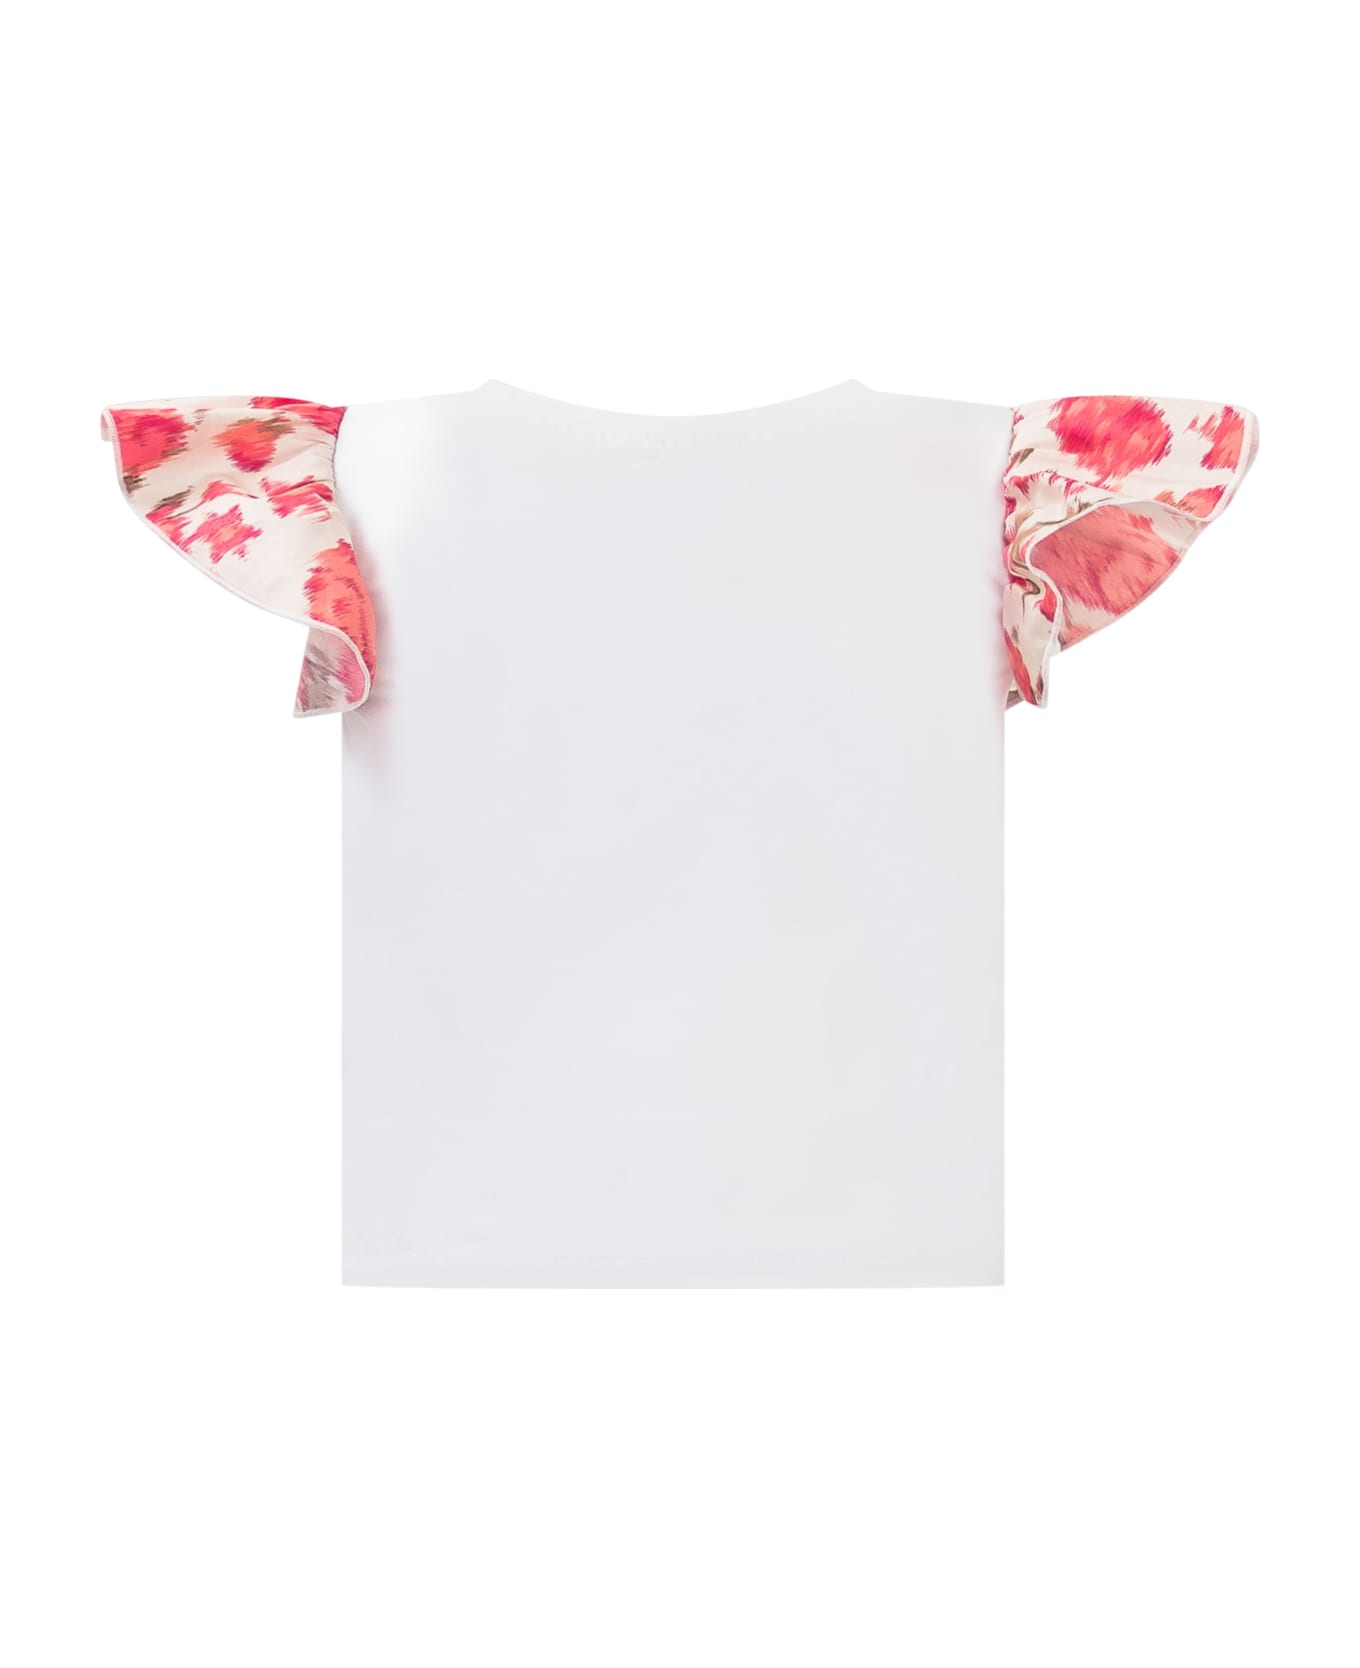 TwinSet T-shirt And Shorts Set - FIORI CAMELIE ROSE